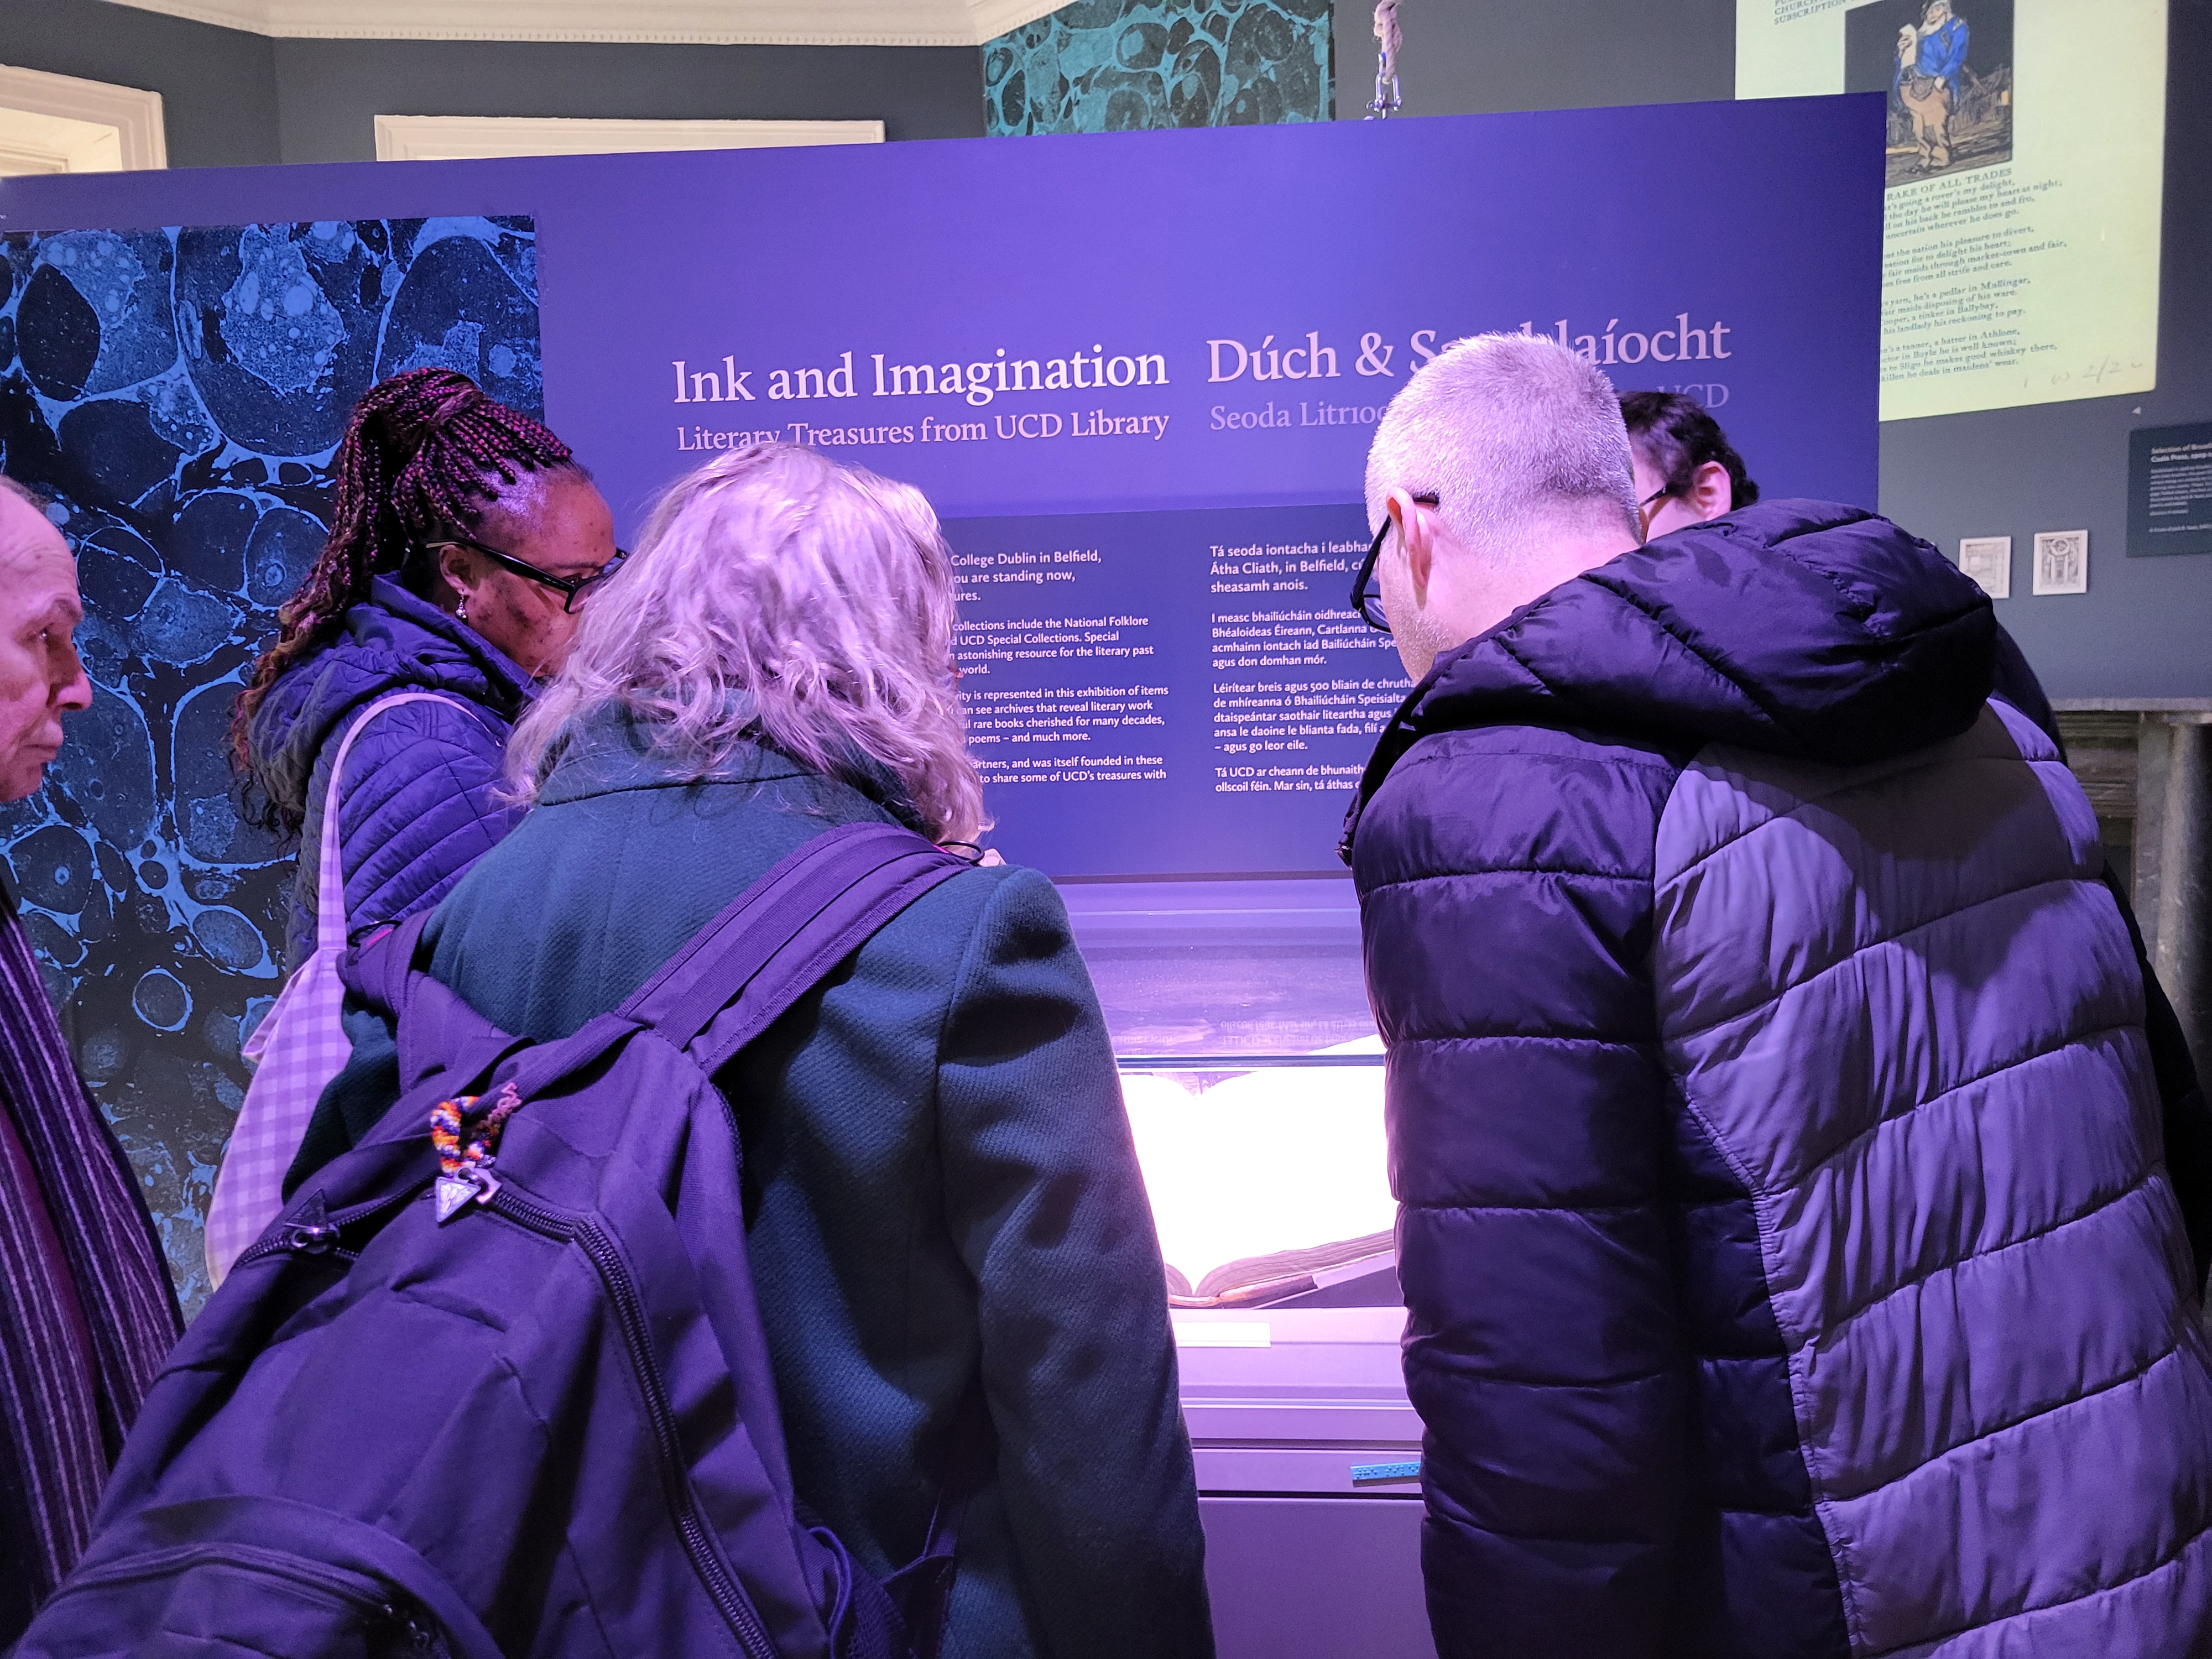 People lean over a book with a purple display in the background which reads 